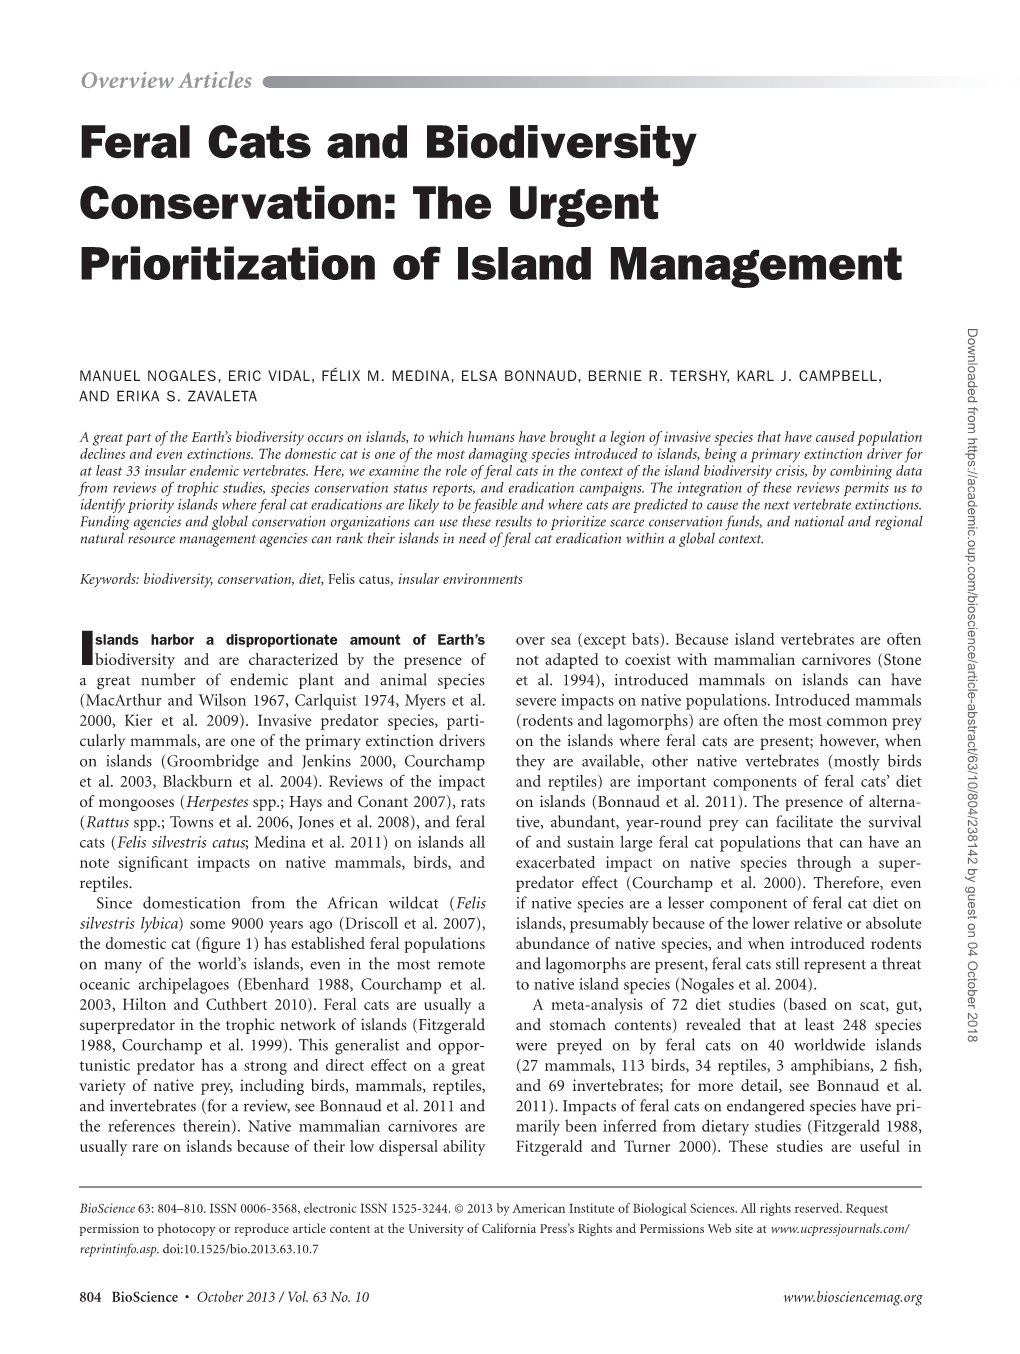 Feral Cats and Biodiversity Conservation: the Urgent